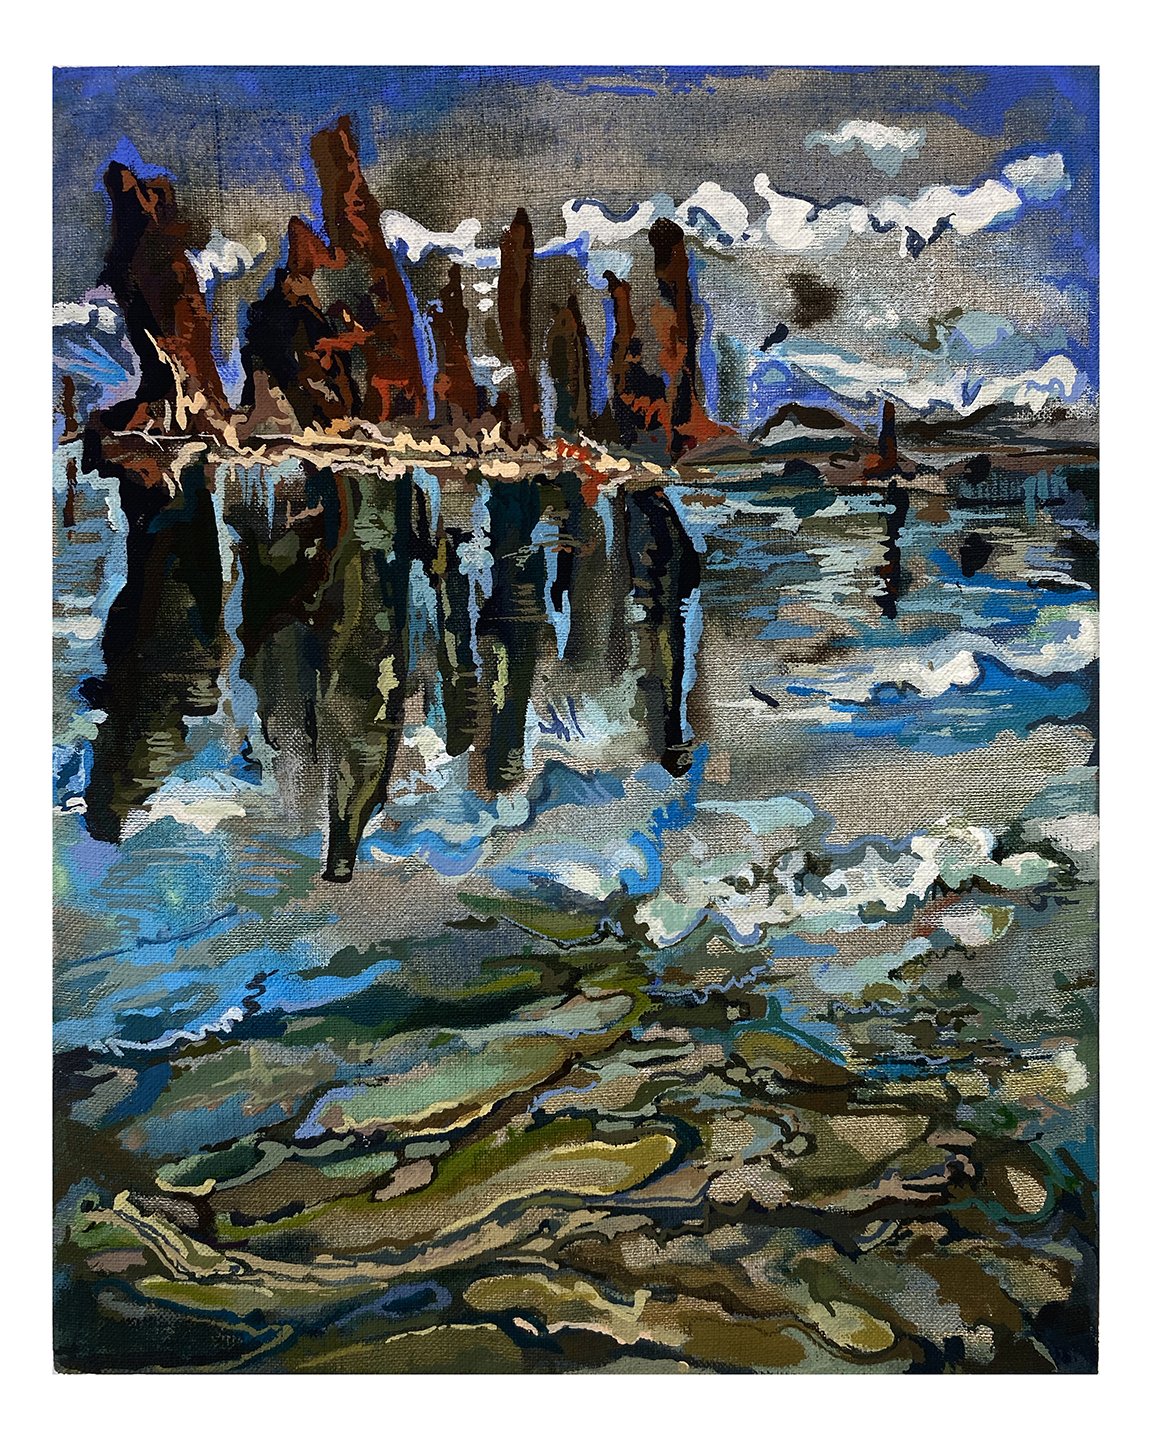  Maria Calandra, Mono Lake Just Before Getting In, 2021, acrylic on linen over panel, 10 x 8 inches 